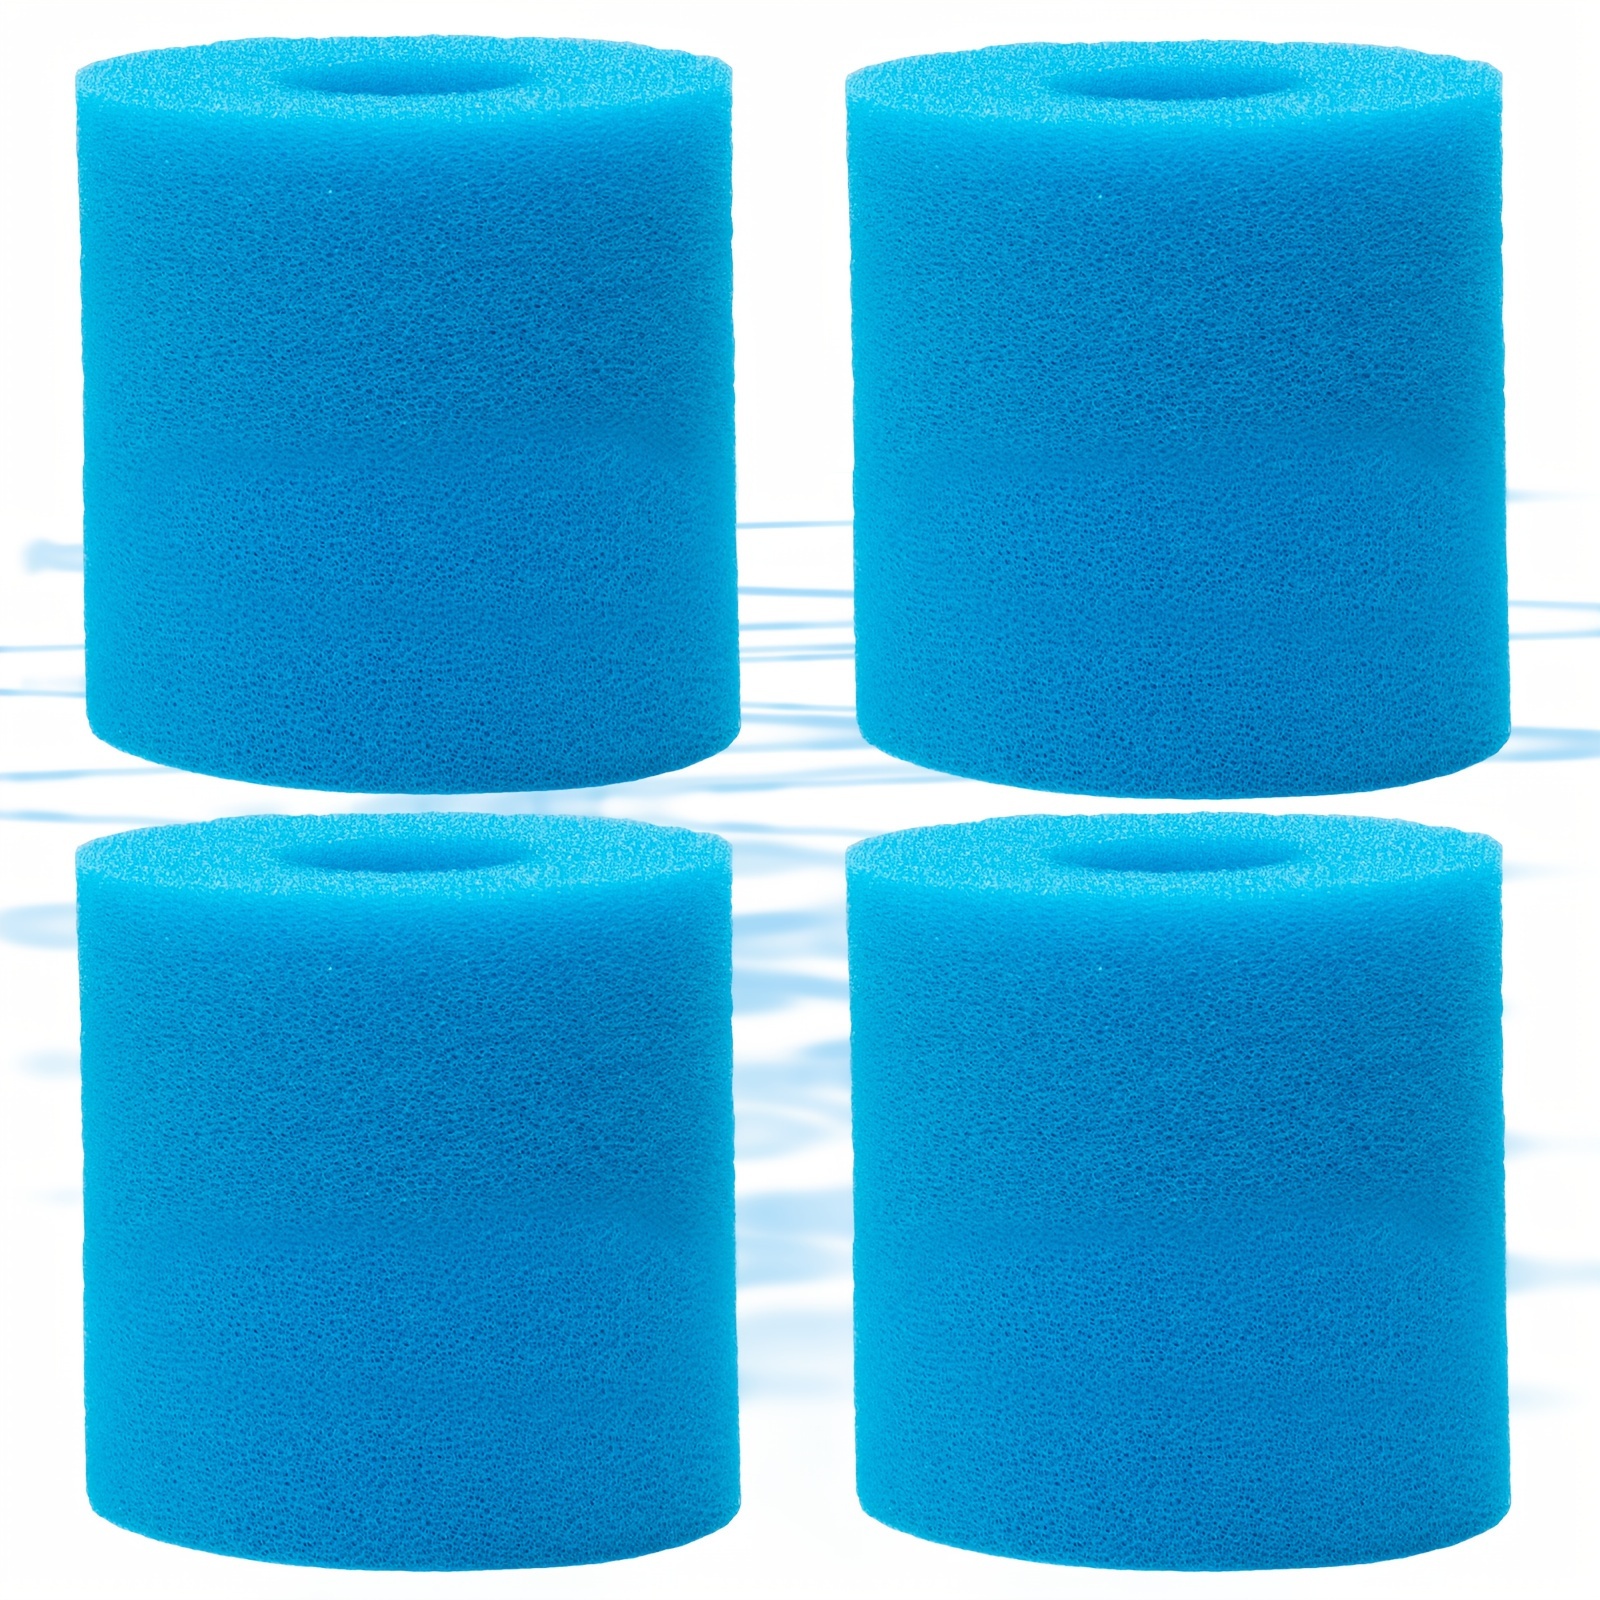 

H-type Pool Filter Sponge - Reusable & Washable Foam Cartridge Toward Pool And Spa Filtration Systems, Compatible With H-type Pool Pumps